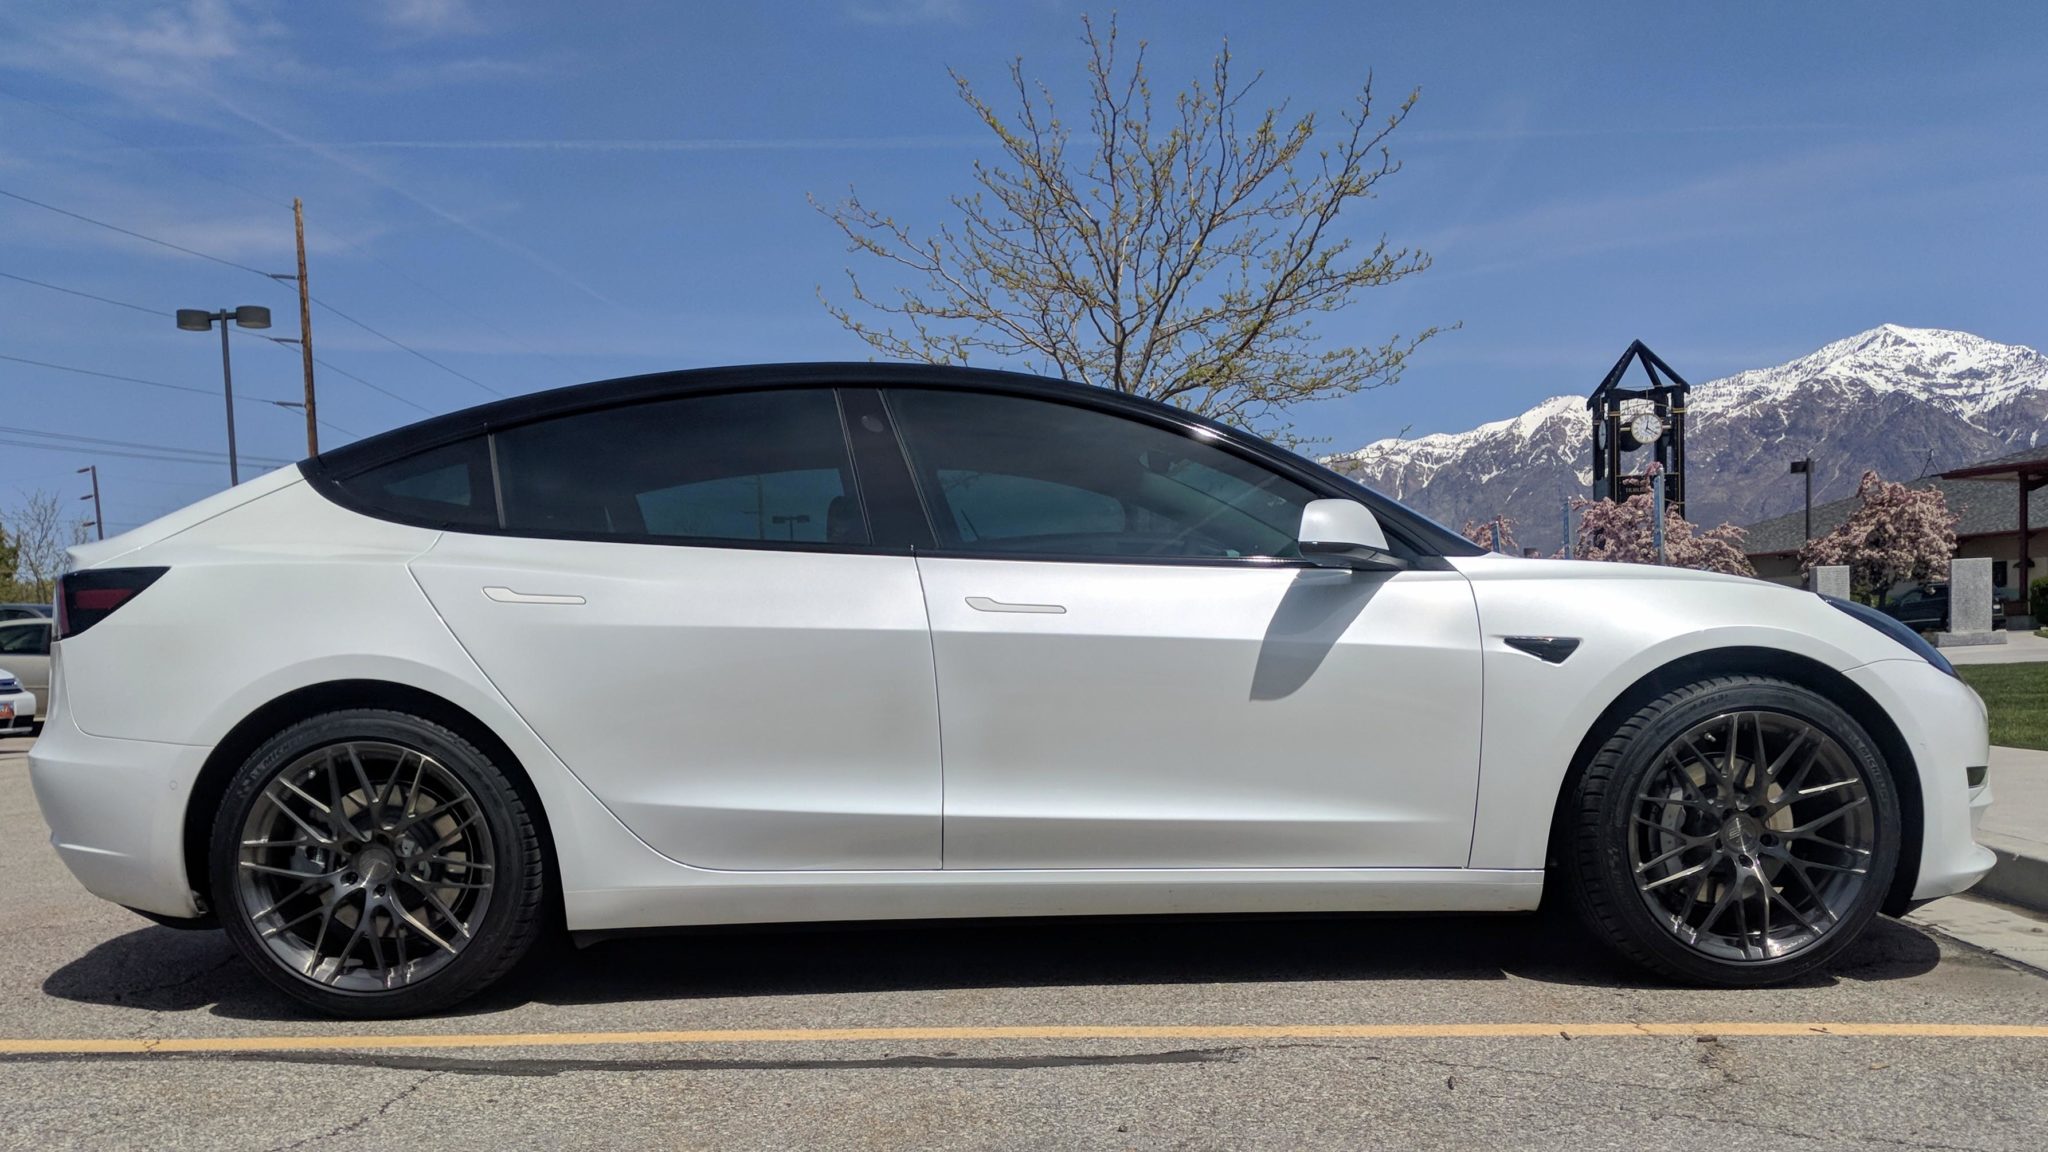 Tesla Model 3 with blacked out top and VS10 wheels, A/S 3+ tires